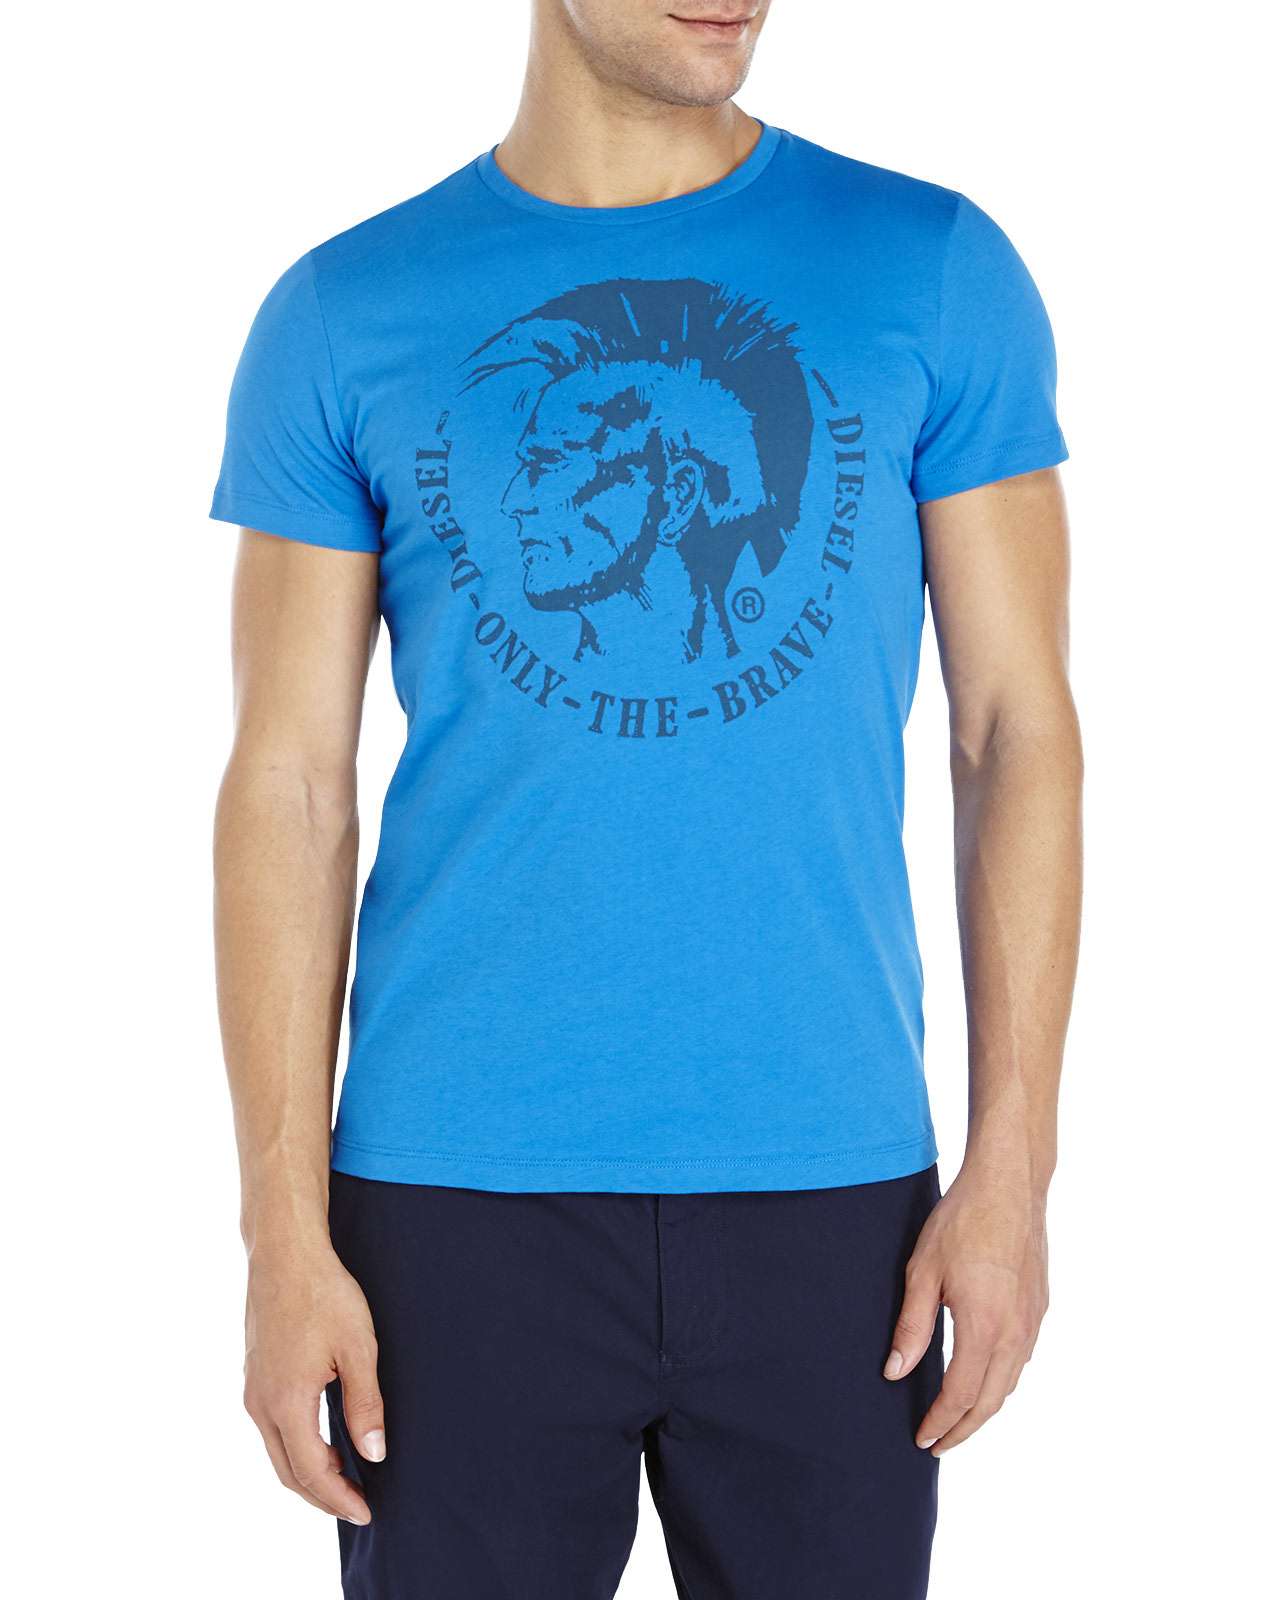 DIESEL Only The Brave Tee in Blue for Men - Lyst